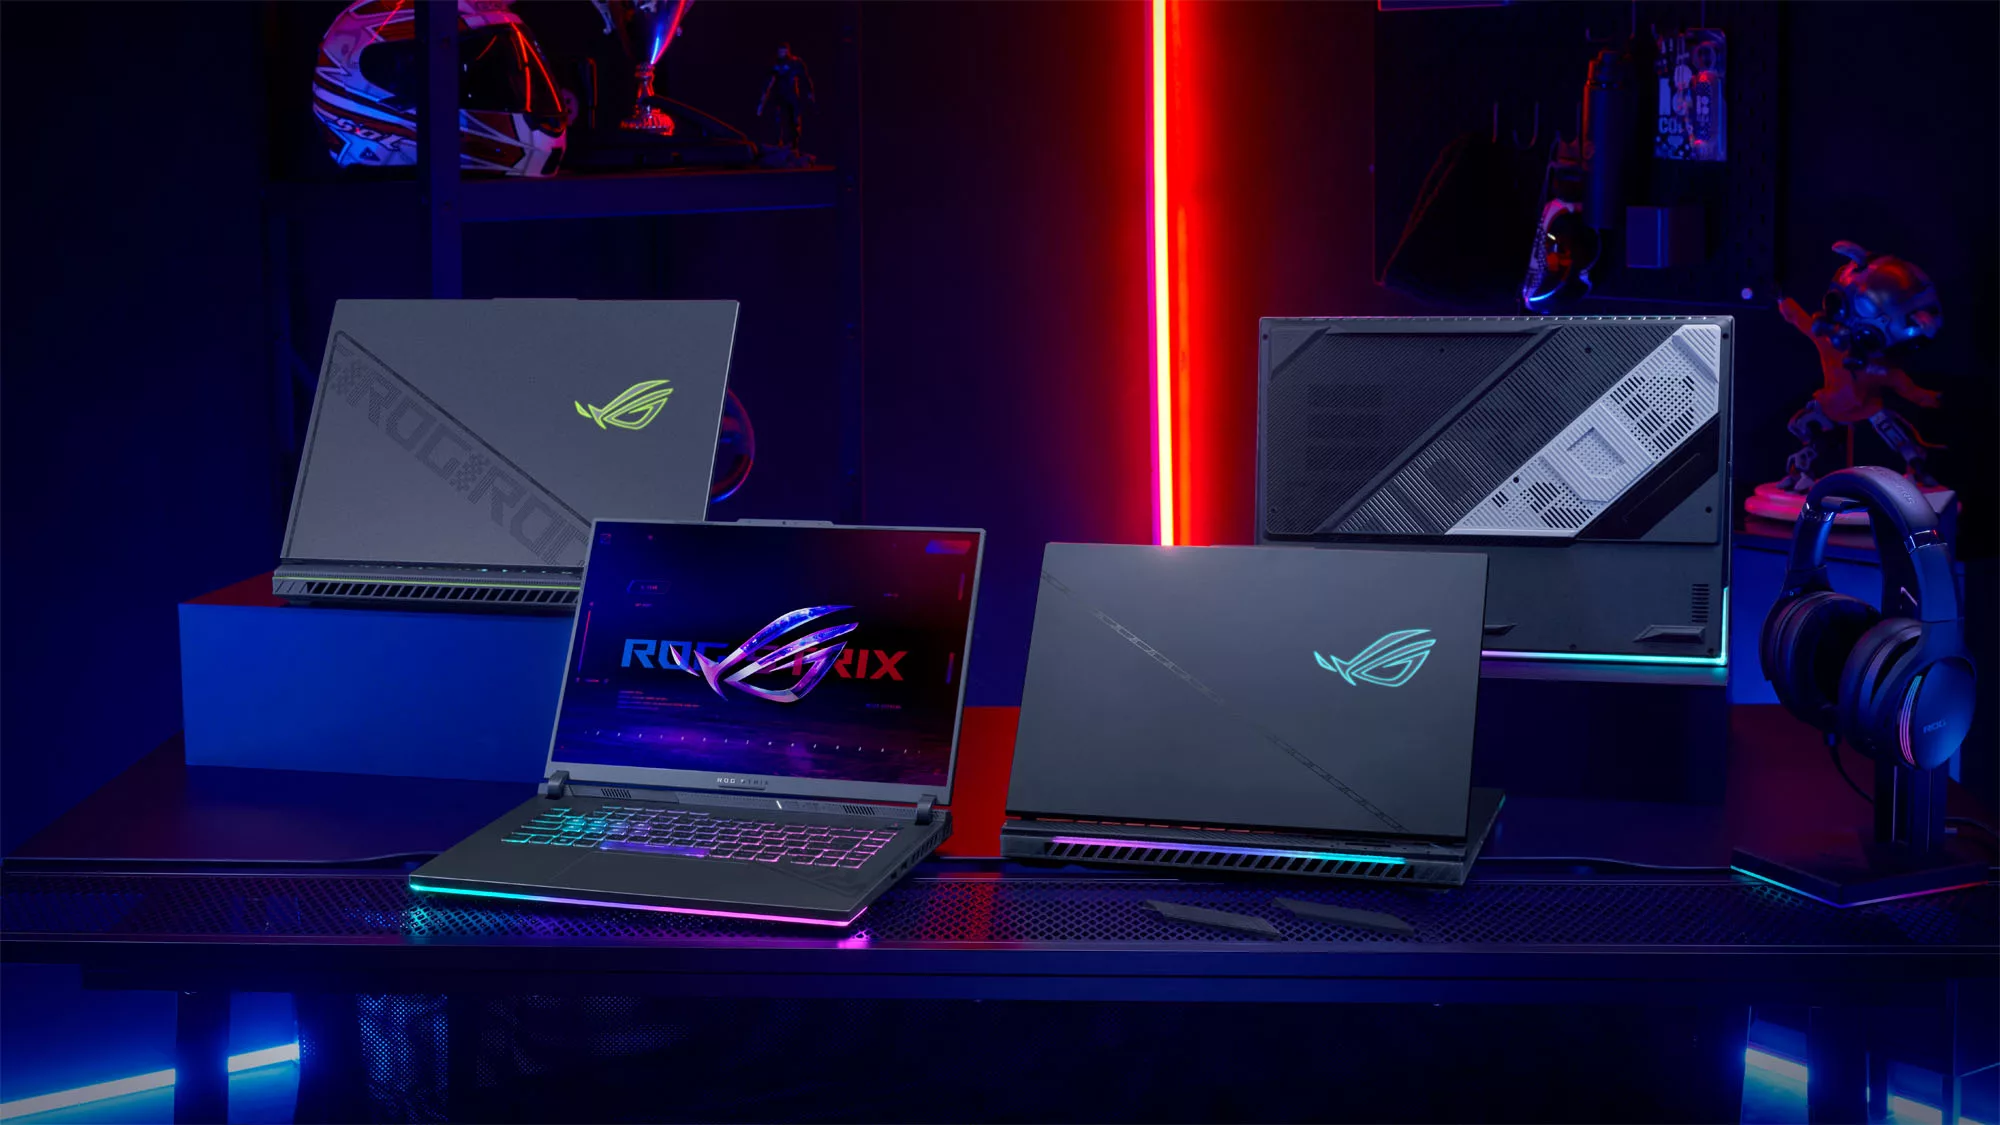 Four ROG Strix laptops facing opposite directions on a table.